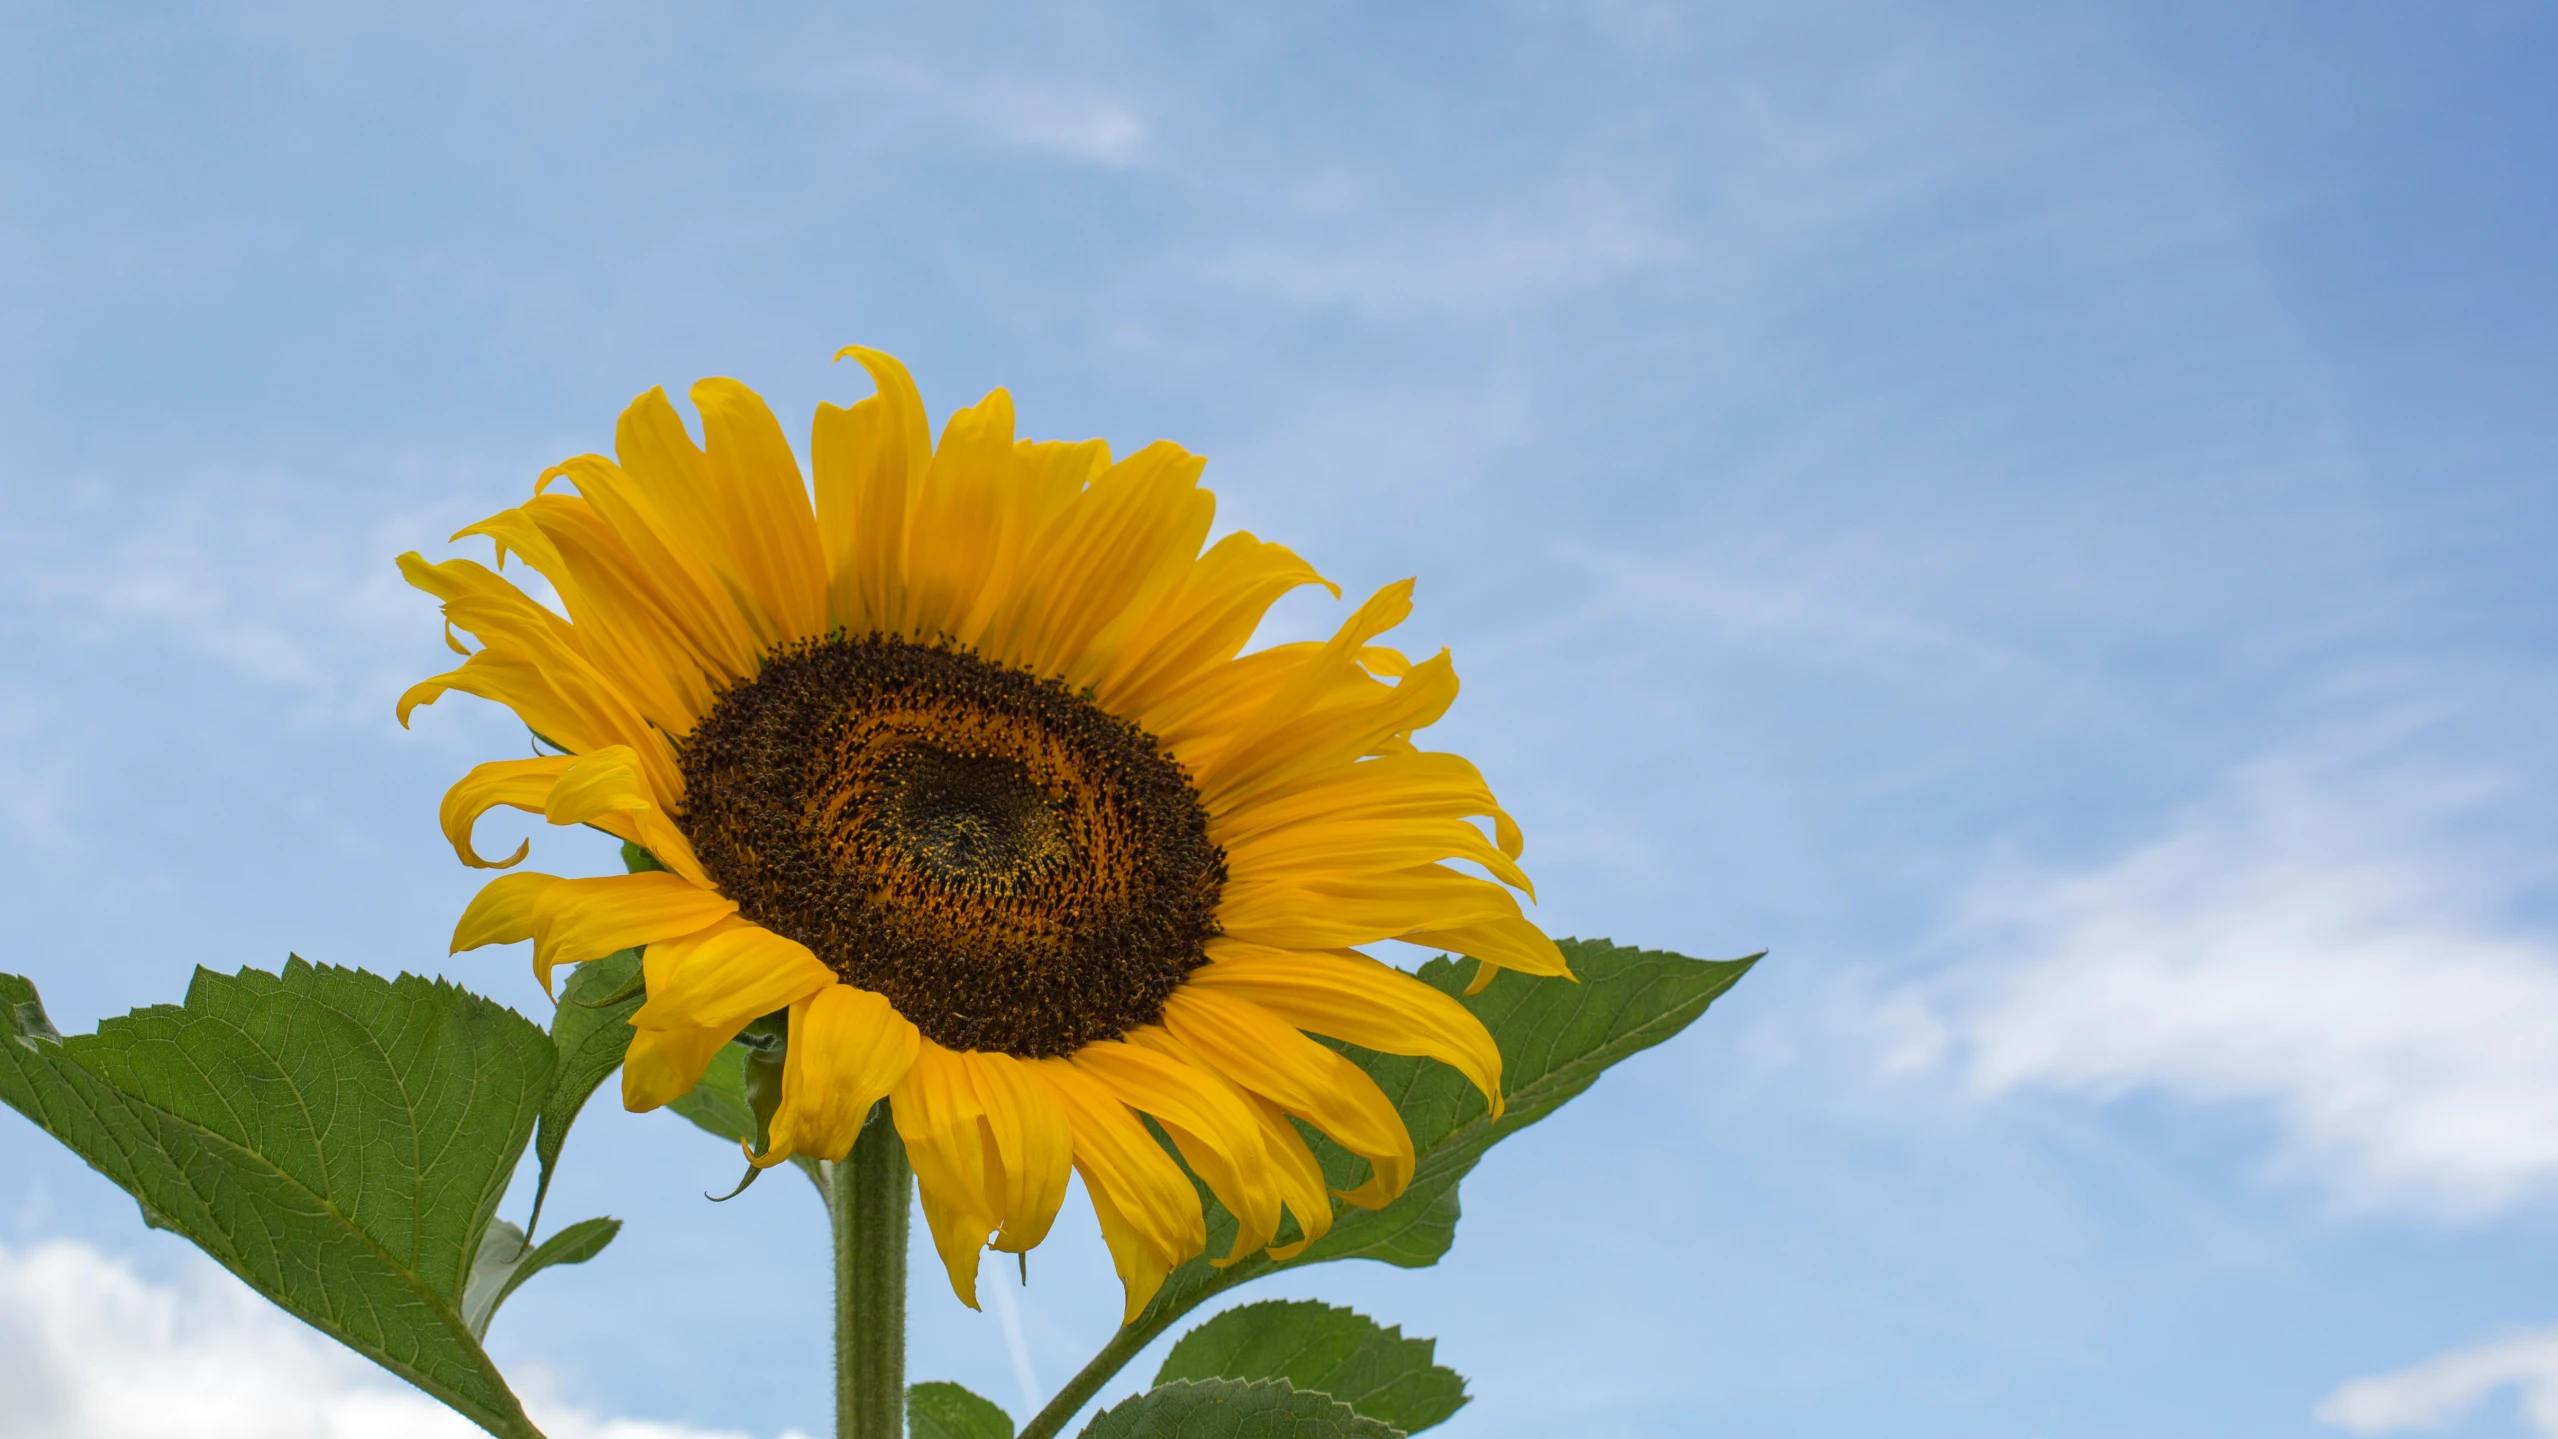 a sunflower is shown on the sunny day